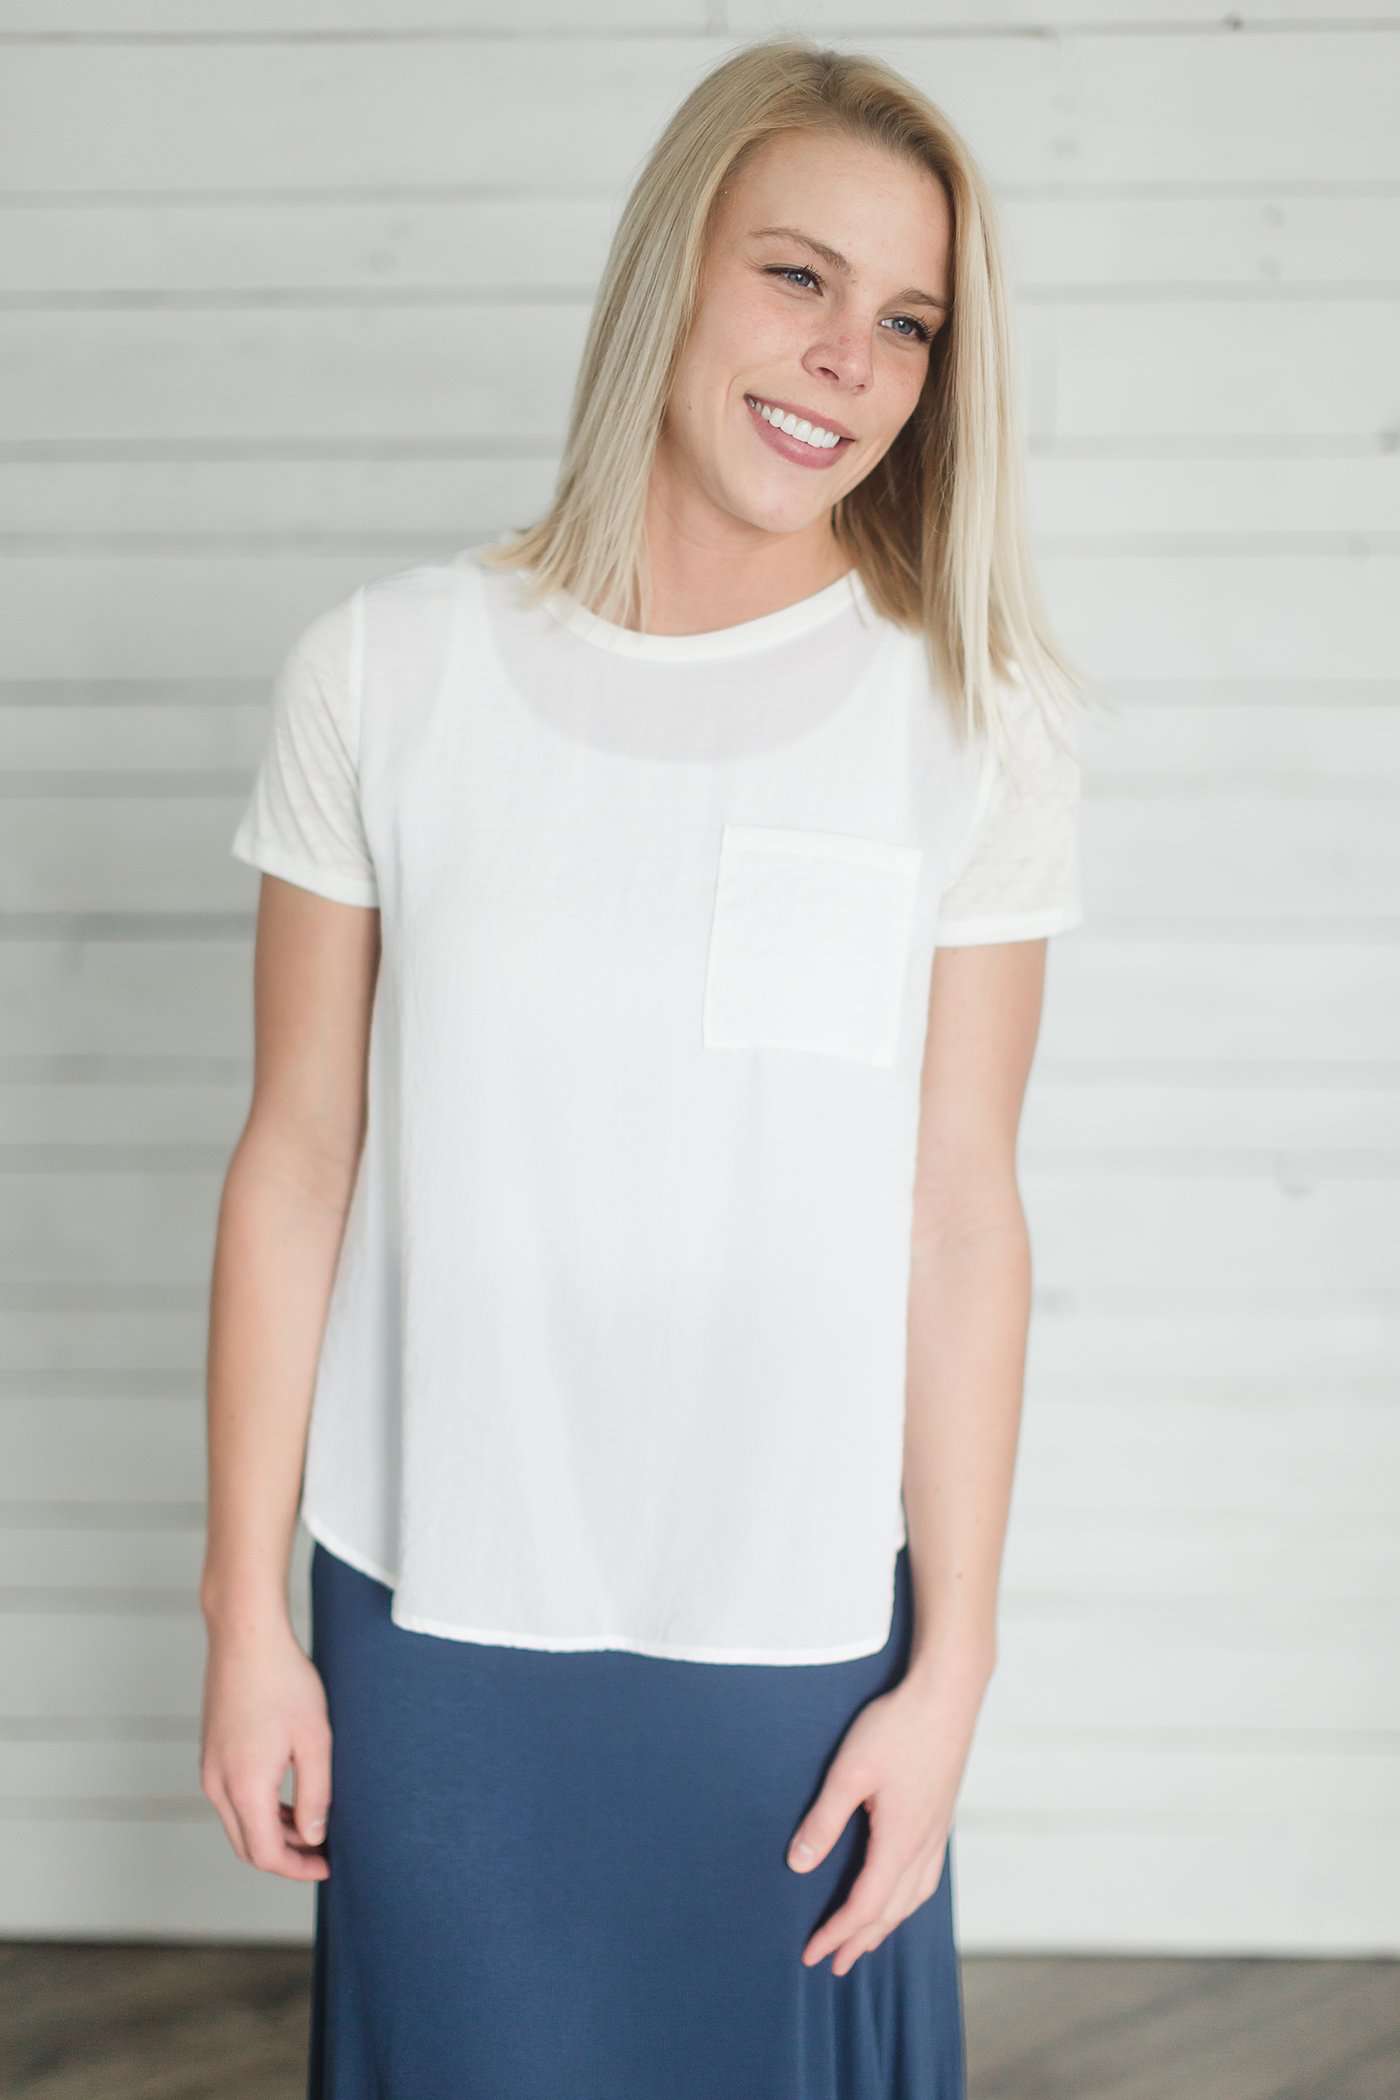 Ivory & White Contrast Tee Tops